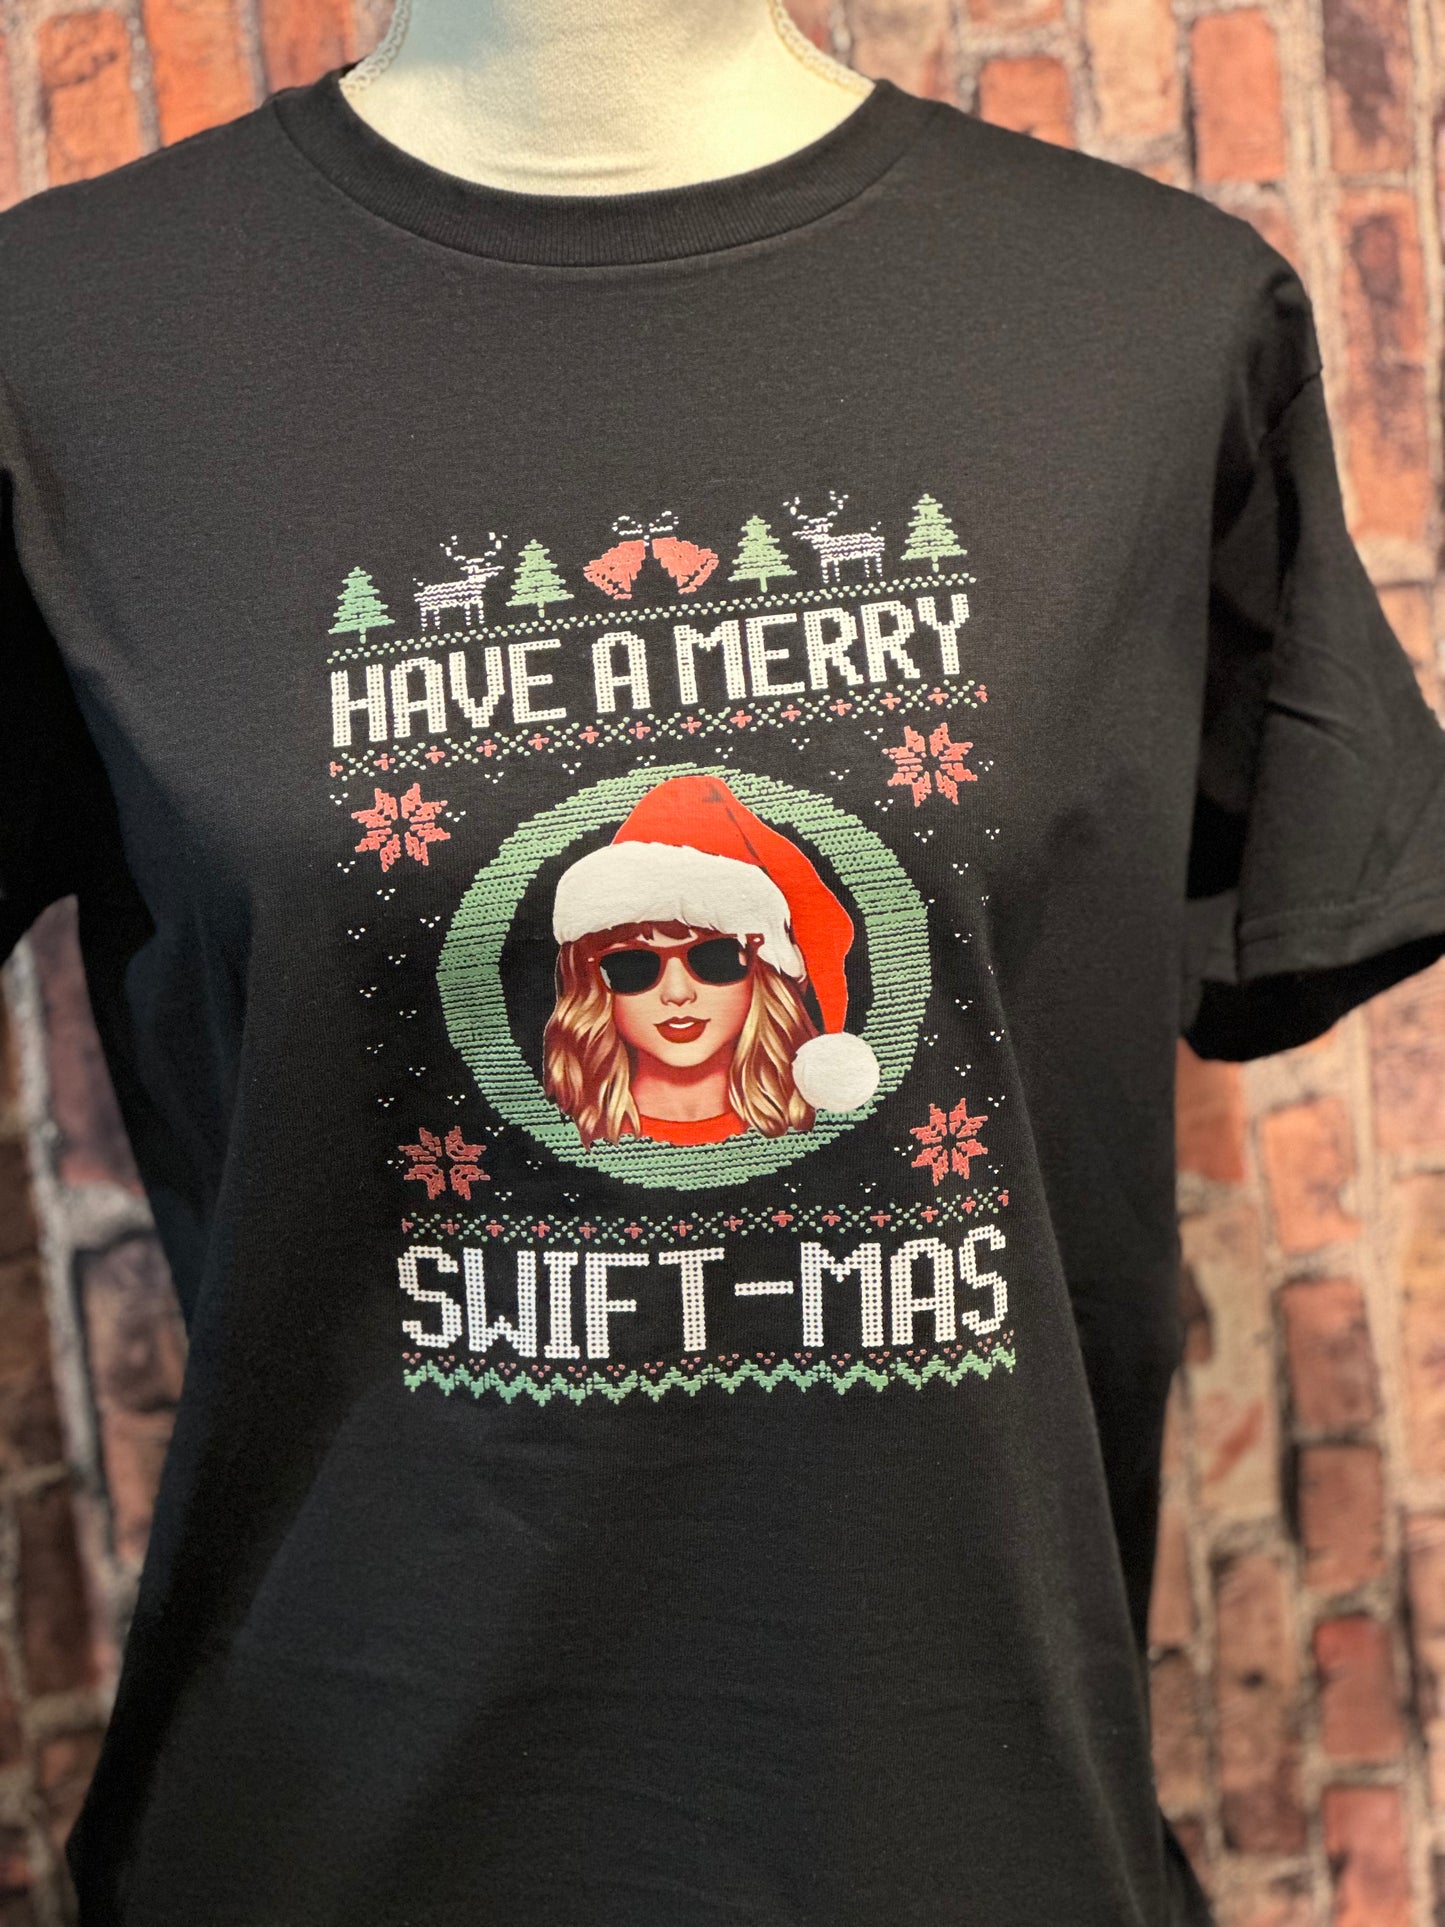 Have a Very Merry Swiftmas